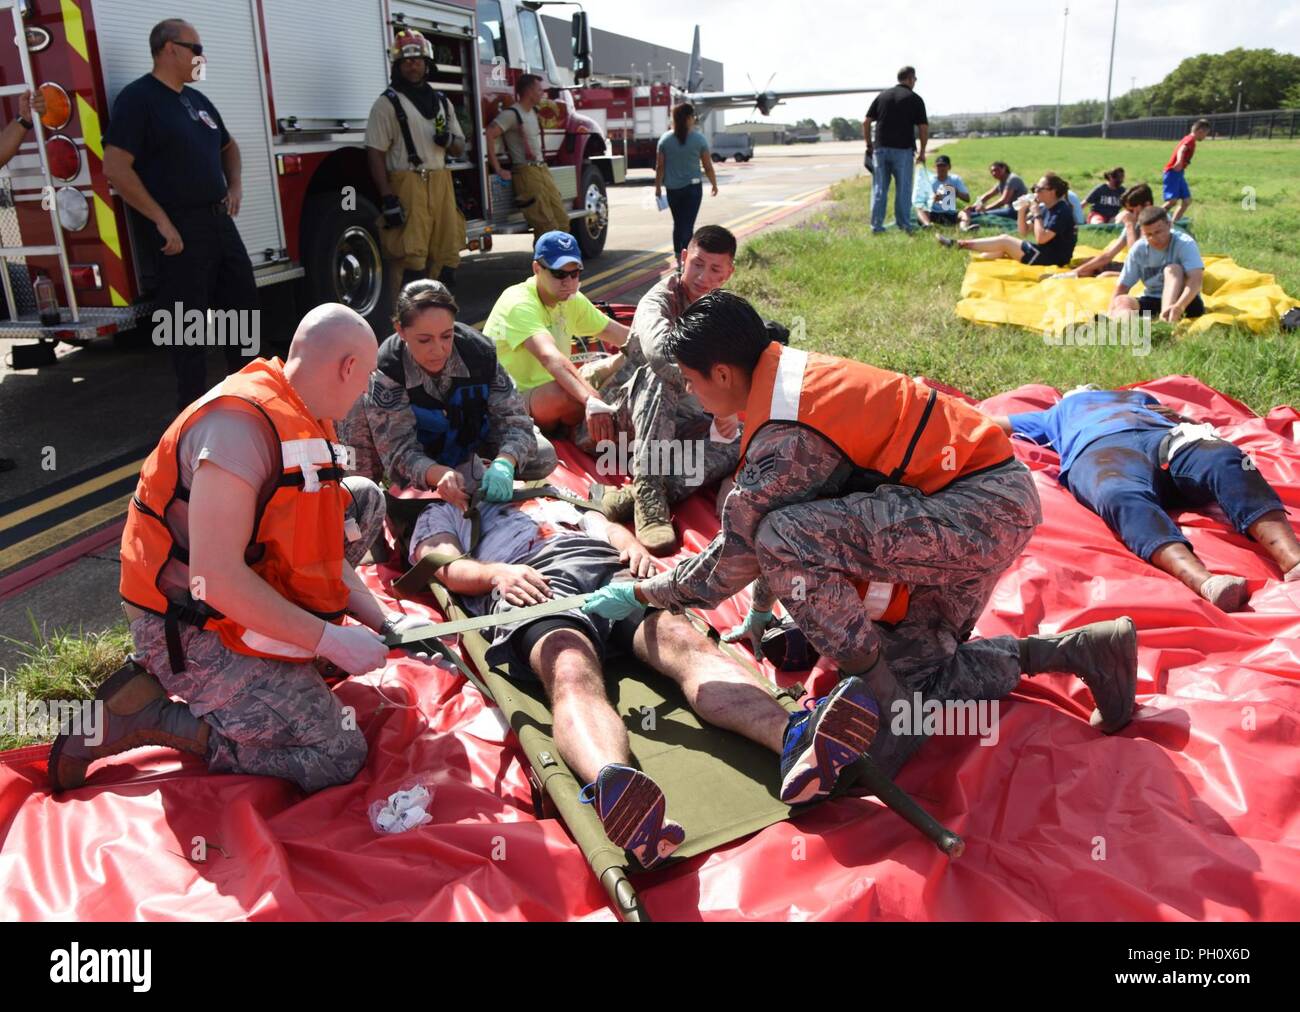 Members of the 81st Medical Group provide triage to “victims” during a major accident response exercise on the flight line at Keesler Air Force Base, Mississippi, June 21, 2018. The exercise scenario simulated a C-130J Super Hercules in-flight emergency causing a plane crash which resulted in a mass casualty response event. This exercise tested the base’s ability to respond in a crisis situation. Stock Photo